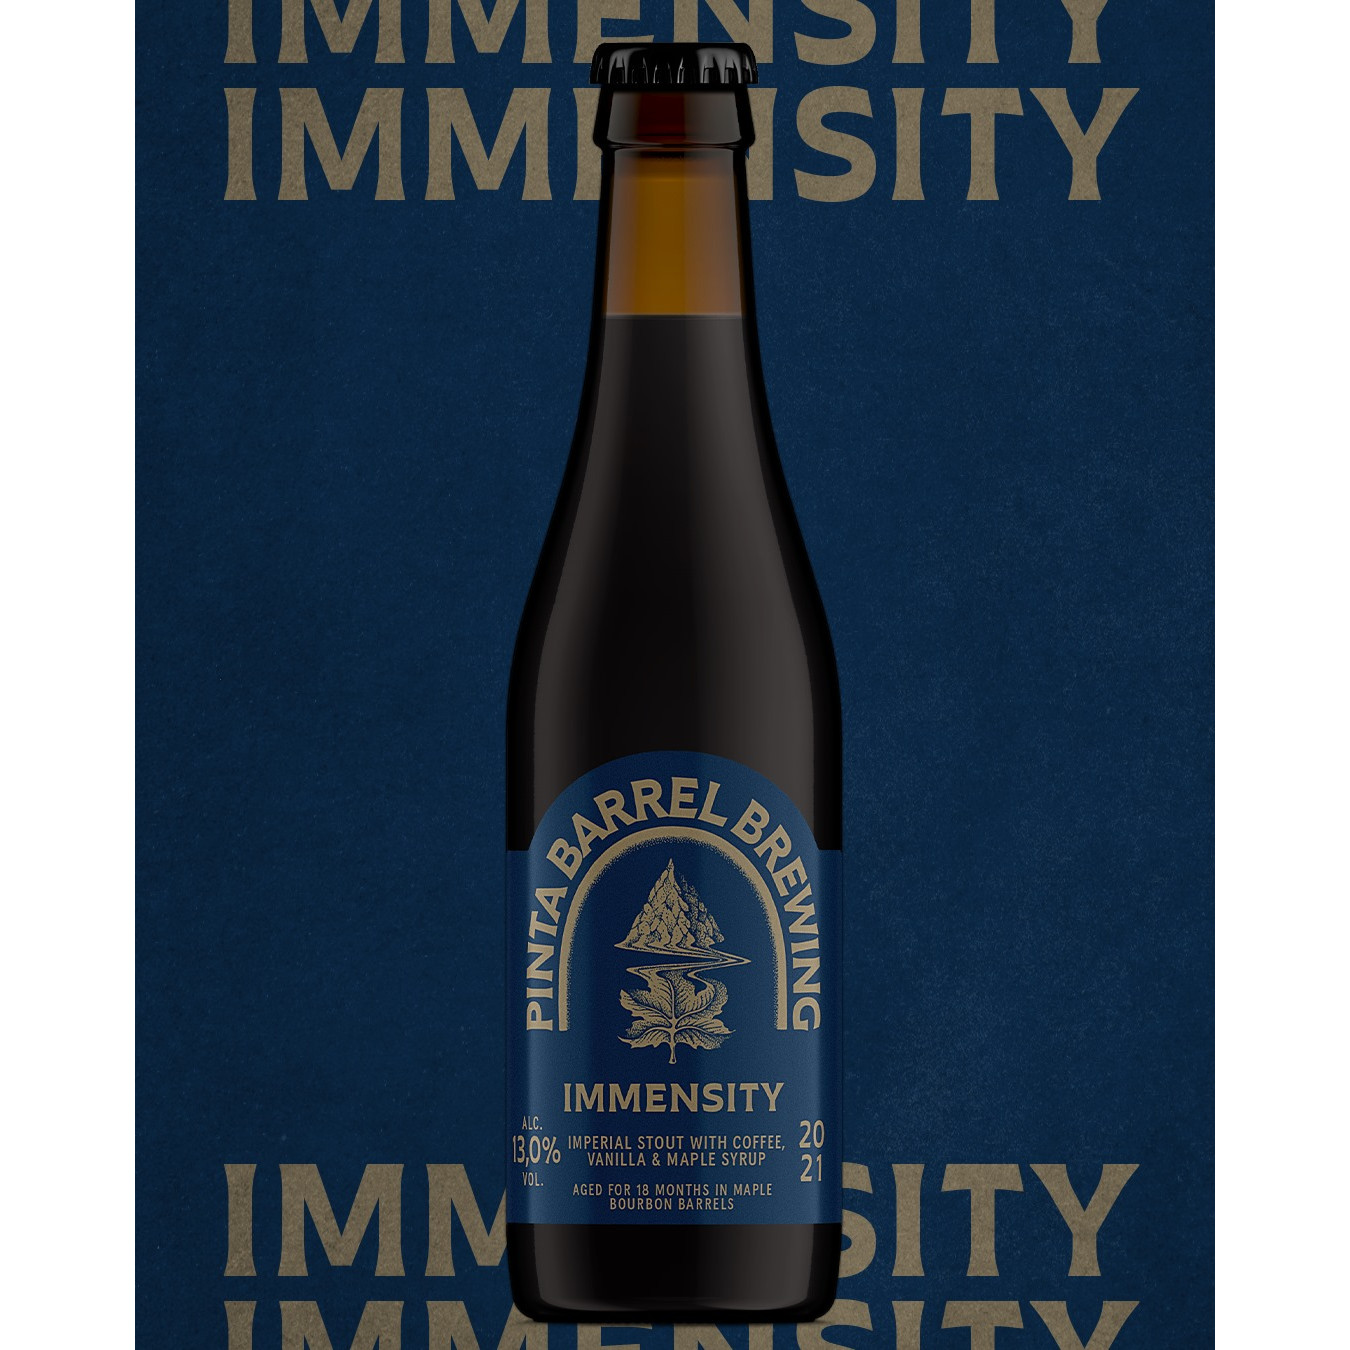 PINTA IMMENSITY – Imperial Stout with Coffee, Vanilla & Maple Syrup